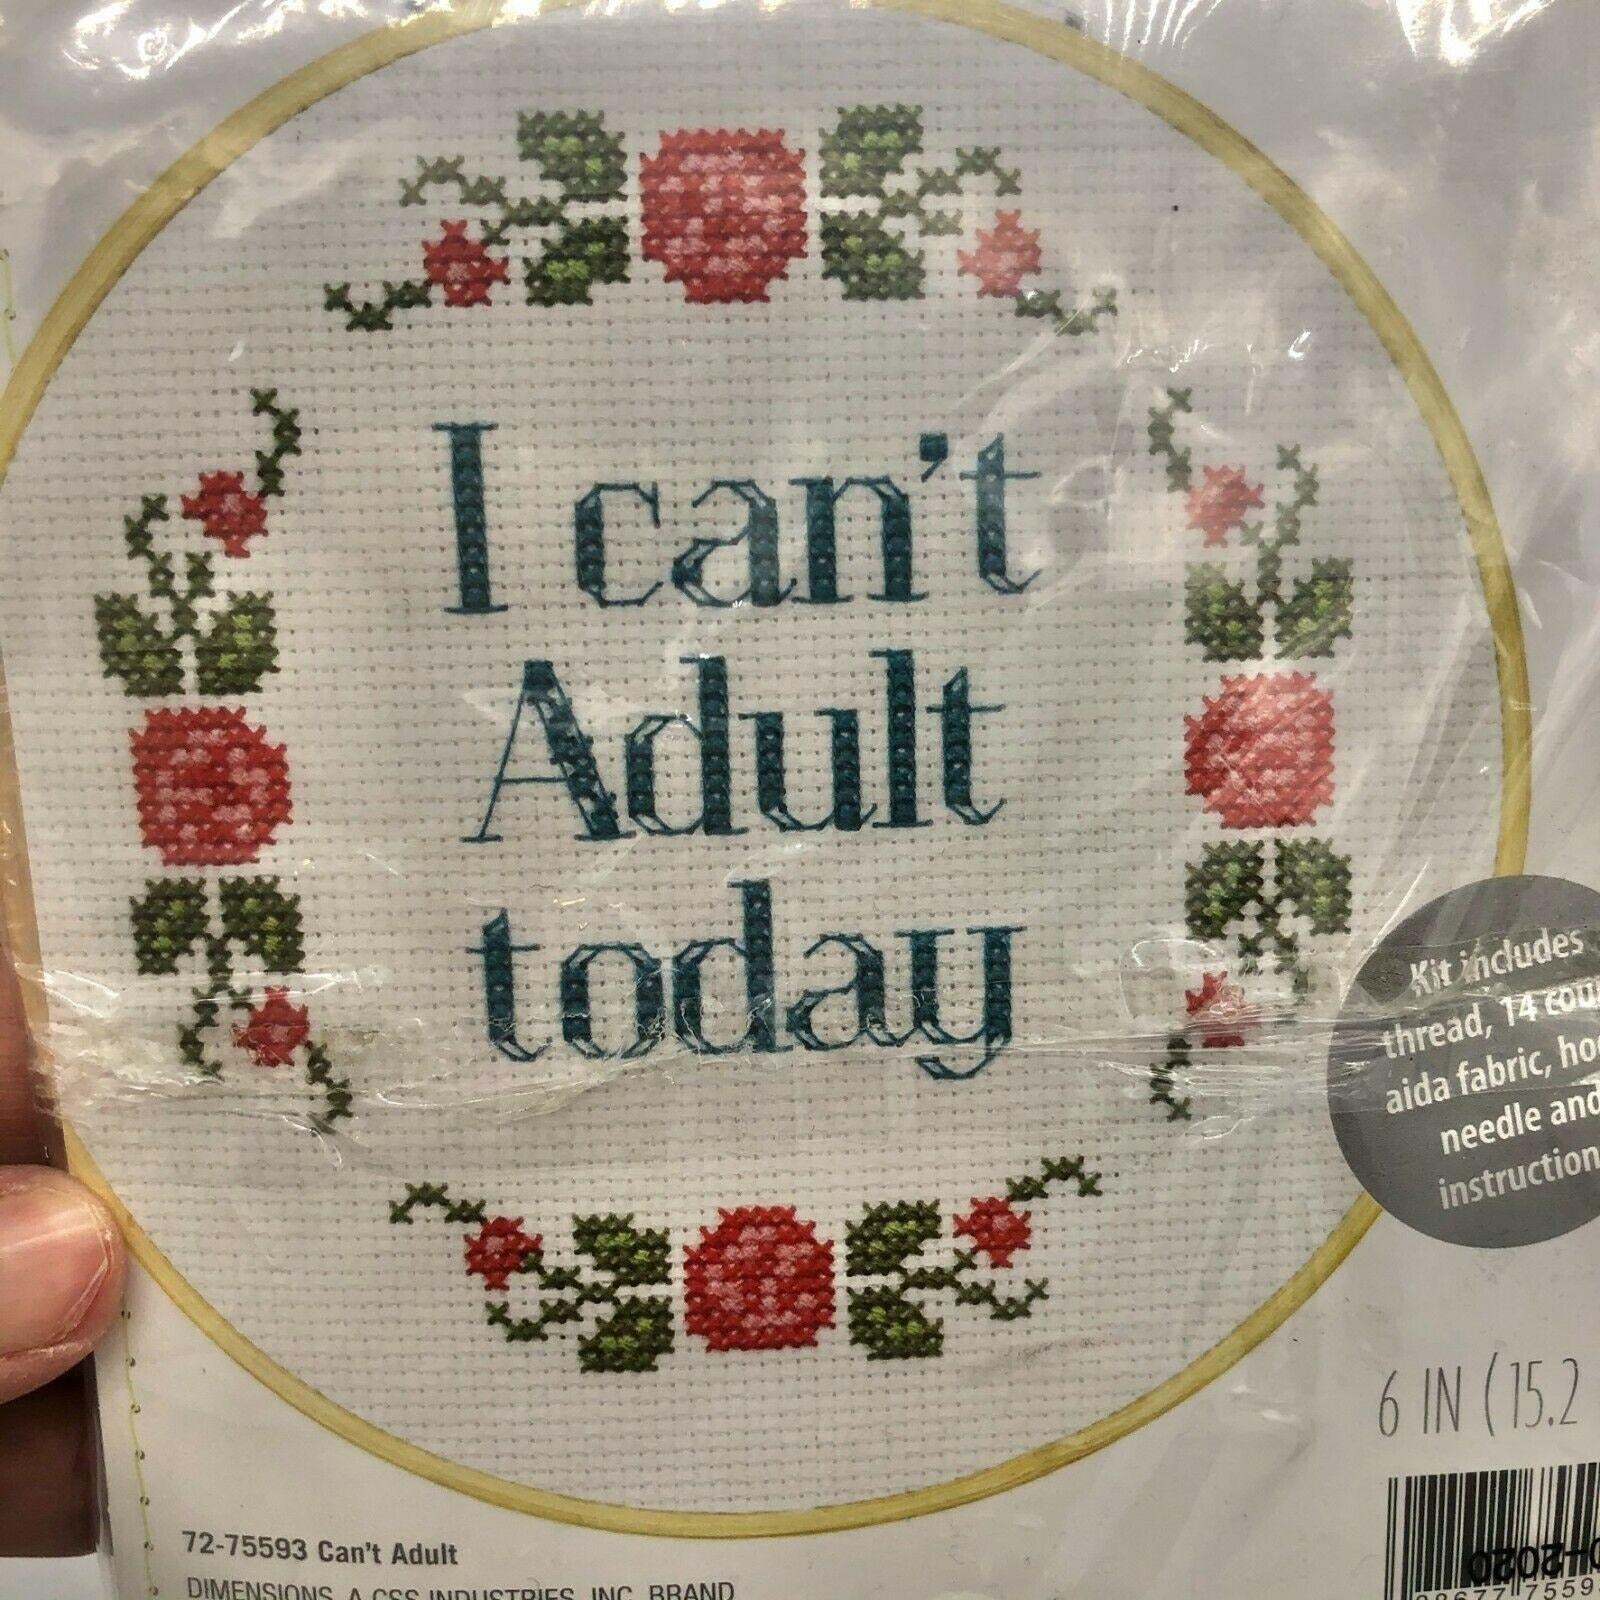 Dimensions 'I Can't Adult Today' Counted Cross Stitch Kit for